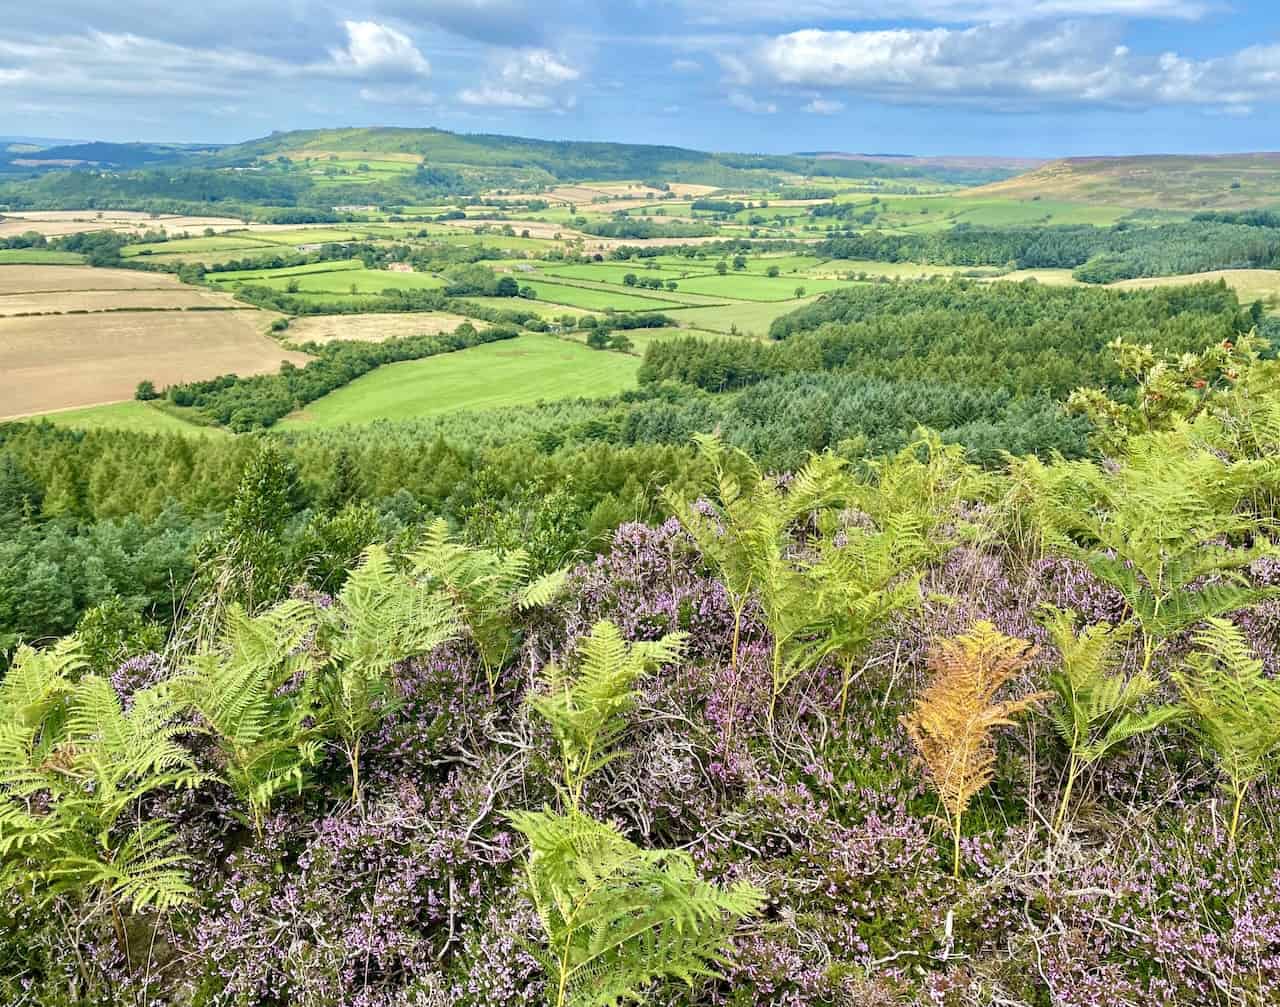 Amazing views from Ingleby Bank across North Yorkshire and the North York Moors. At Ingleby Bank we're about two-thirds of the way round our Urra Moor walk.